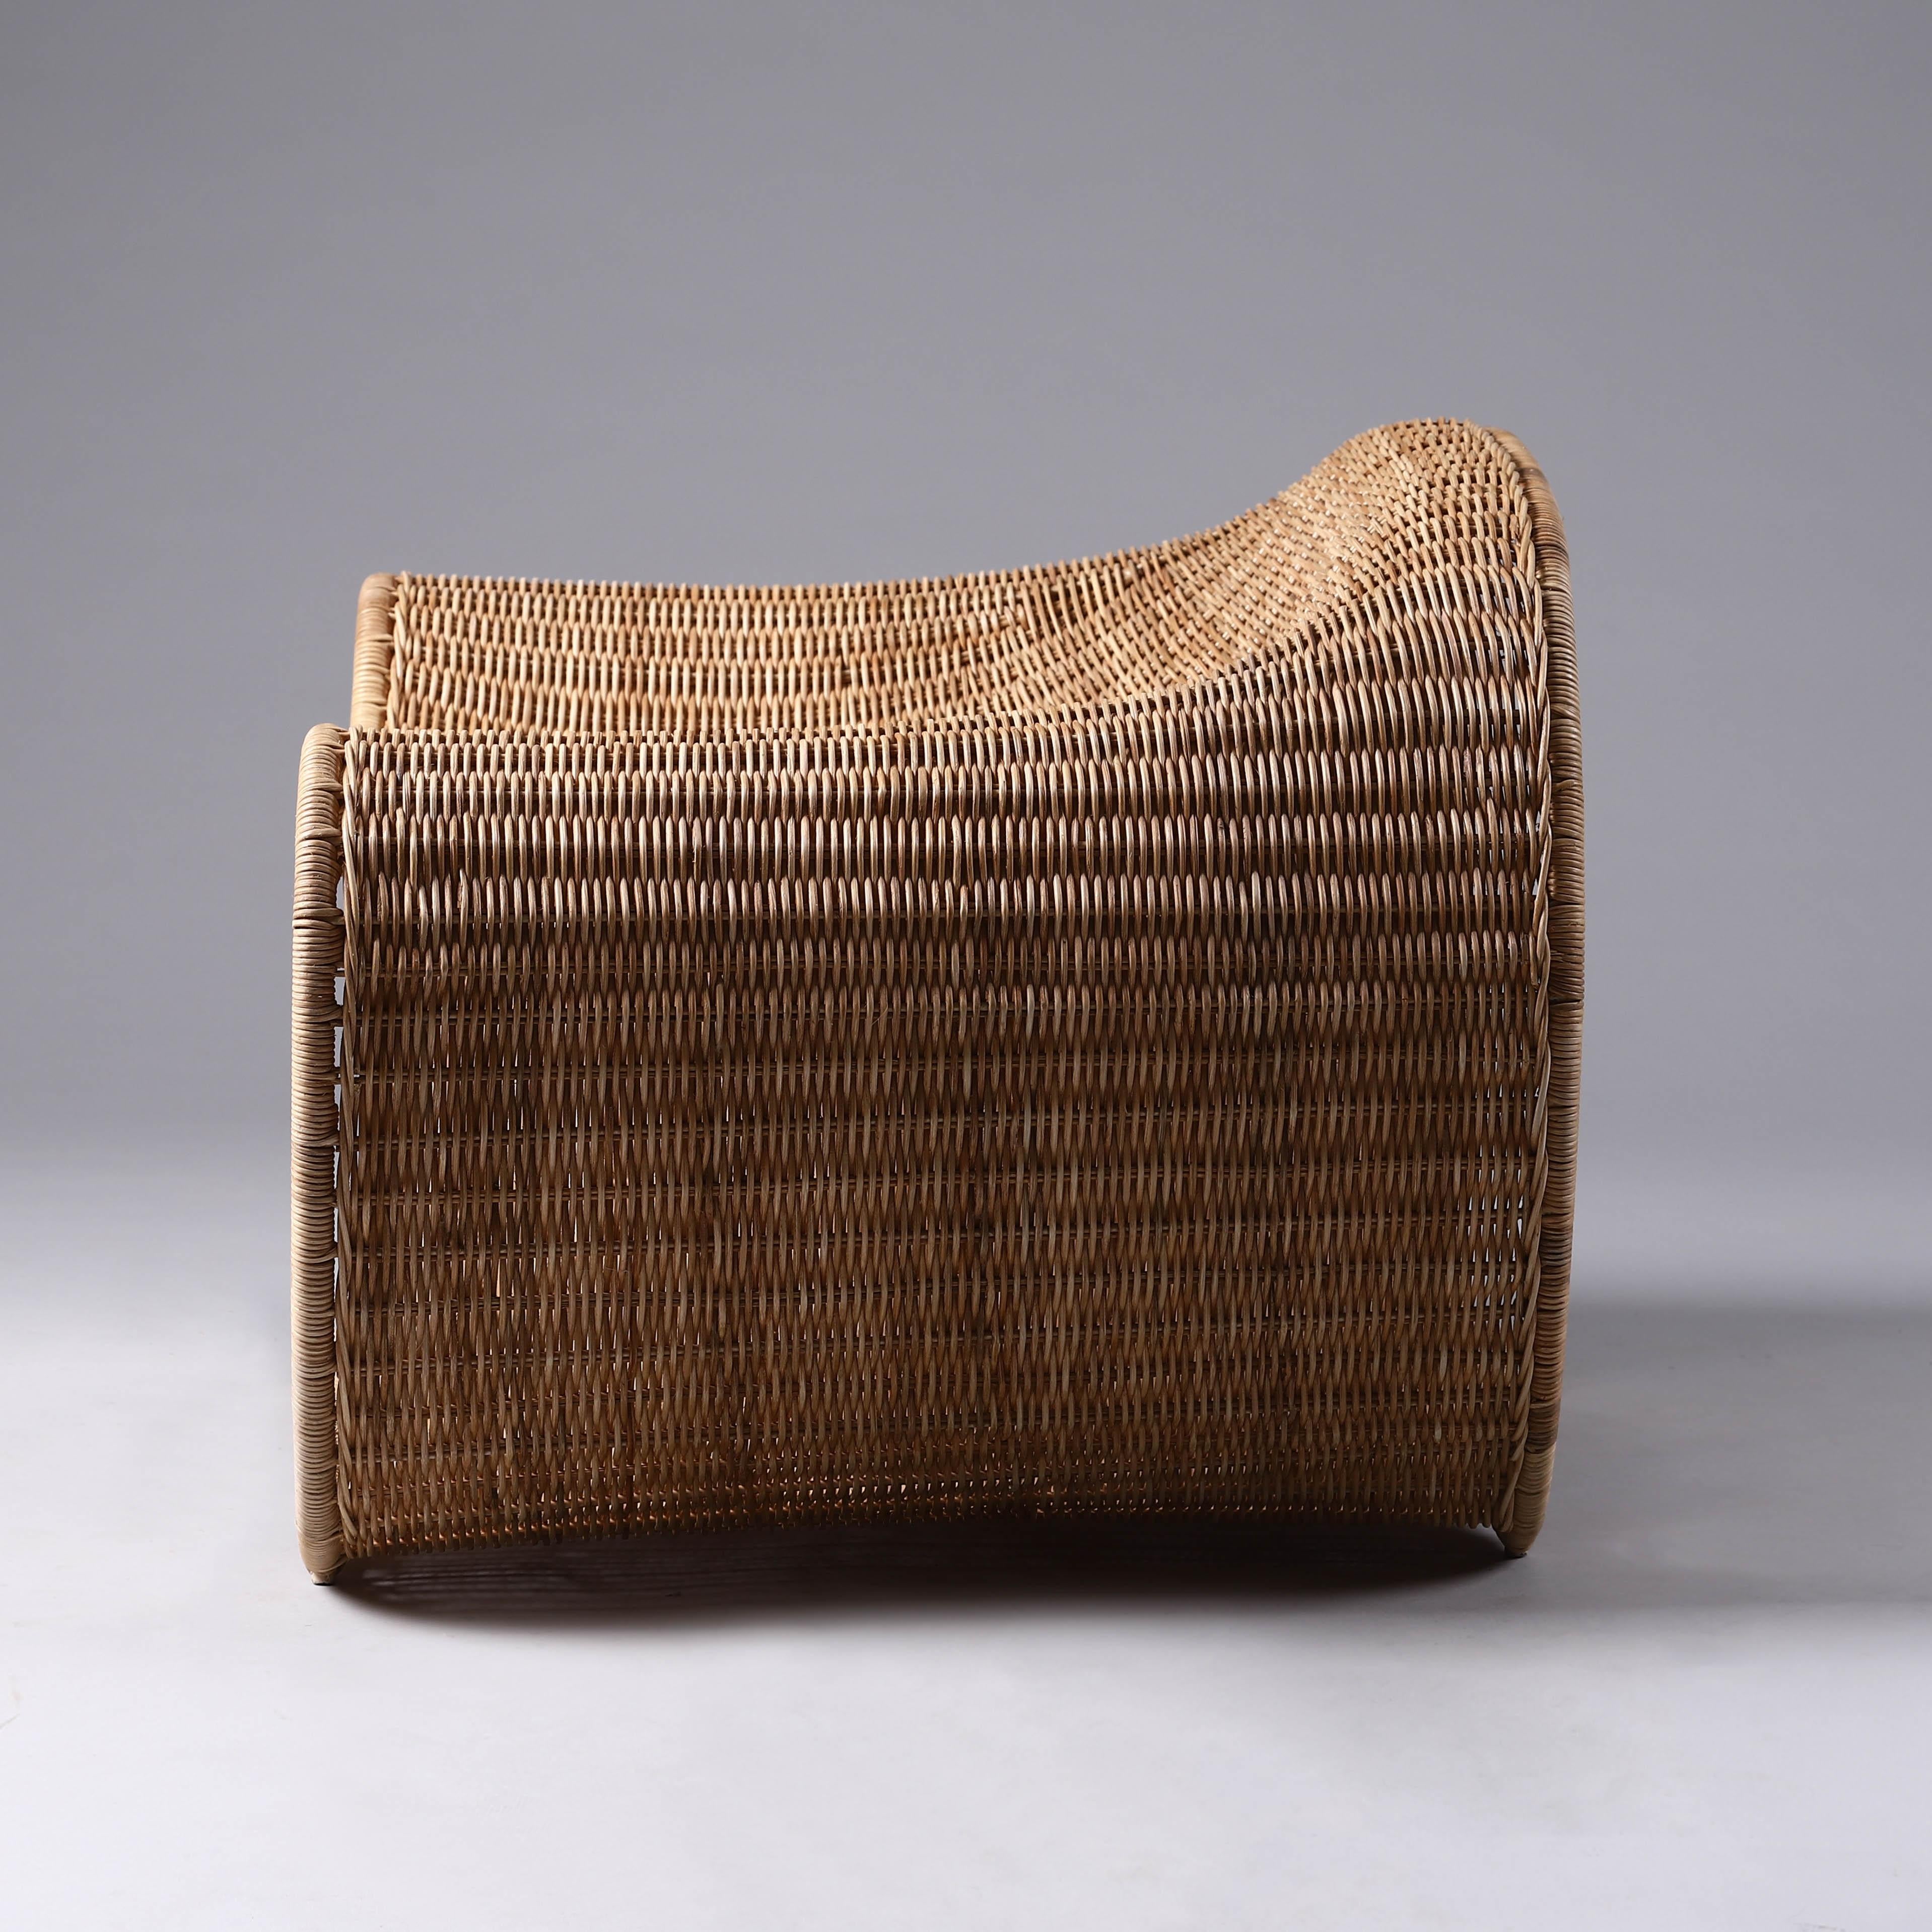 Philippine Luisa Wicker Lounge Chair For Sale